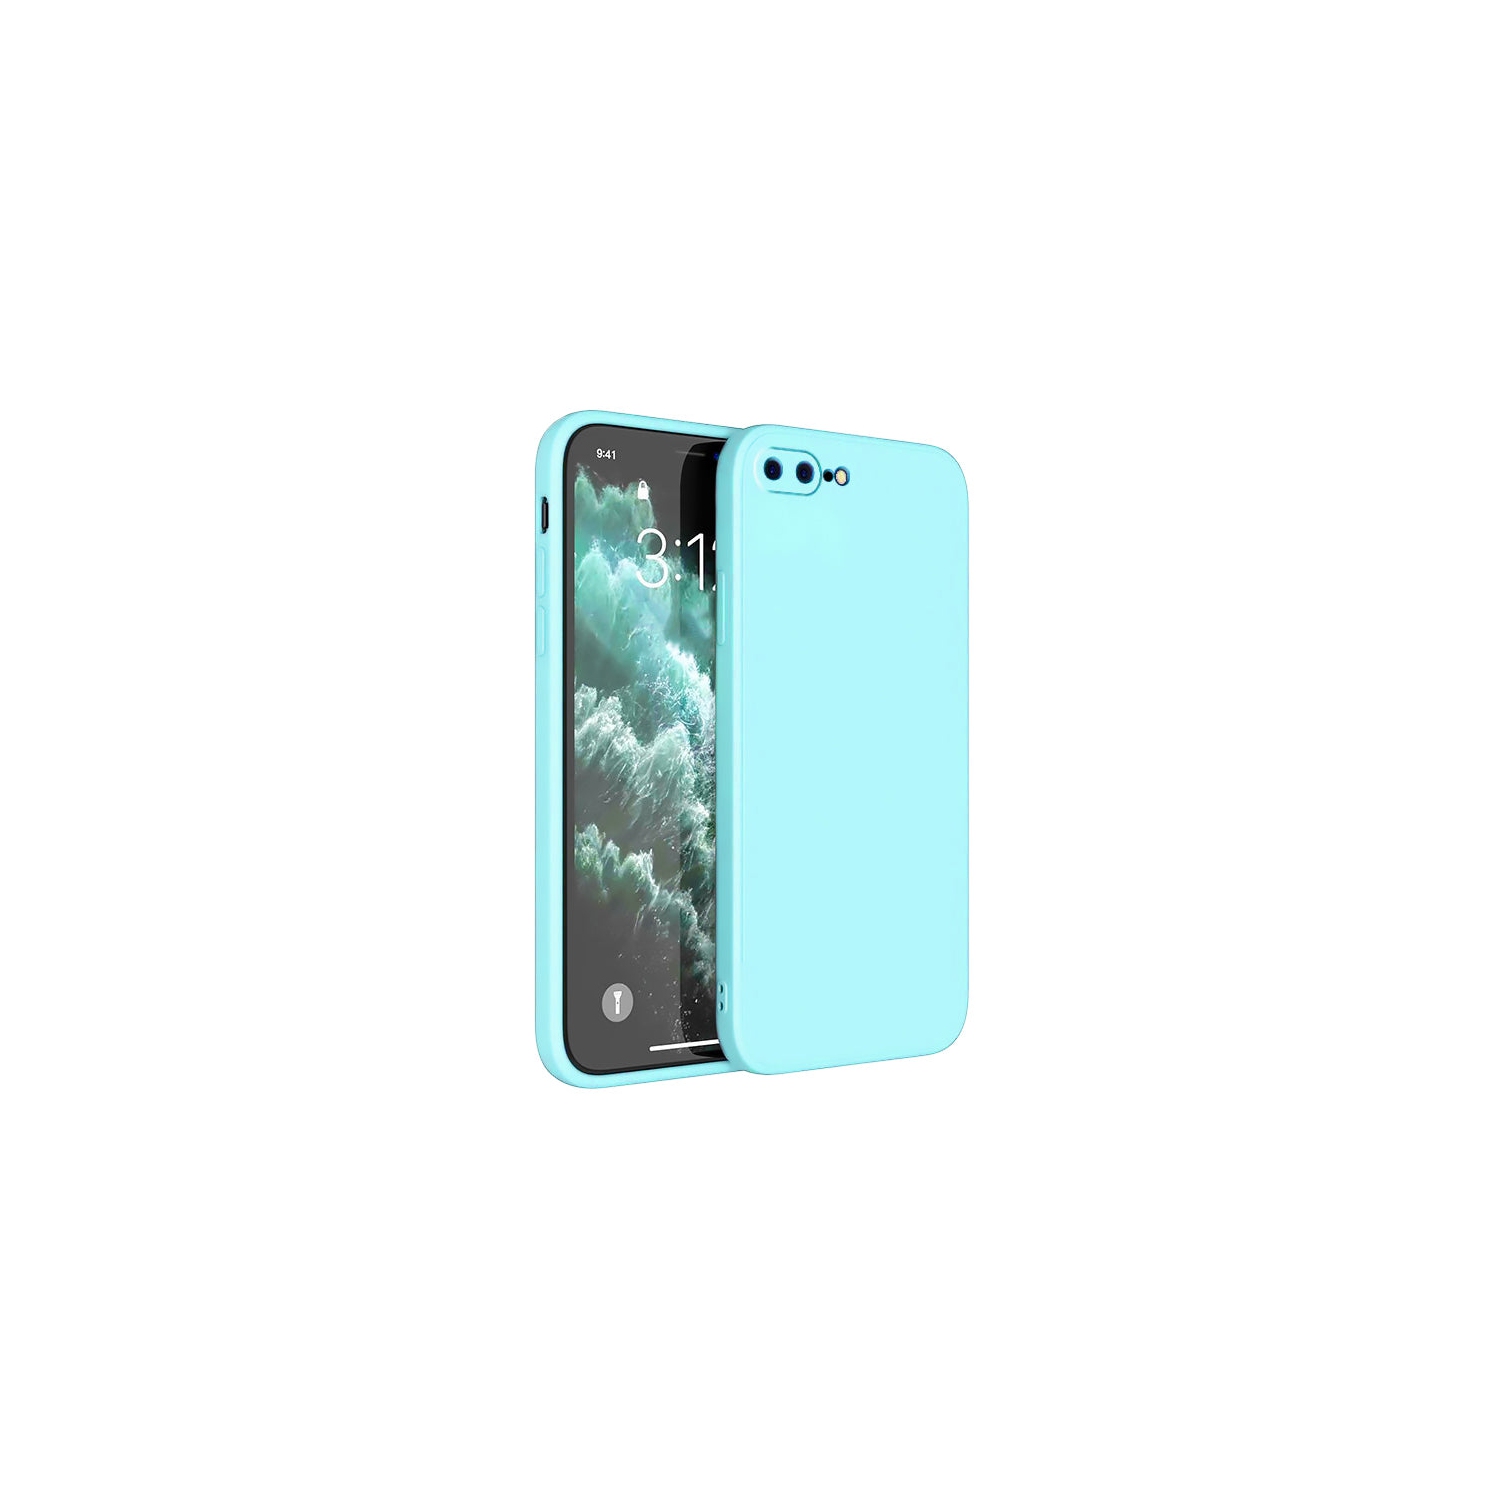 PANDACO Soft Shell Matte Mint Blue Case for iPhone 7 Plus or iPhone 8 Plus